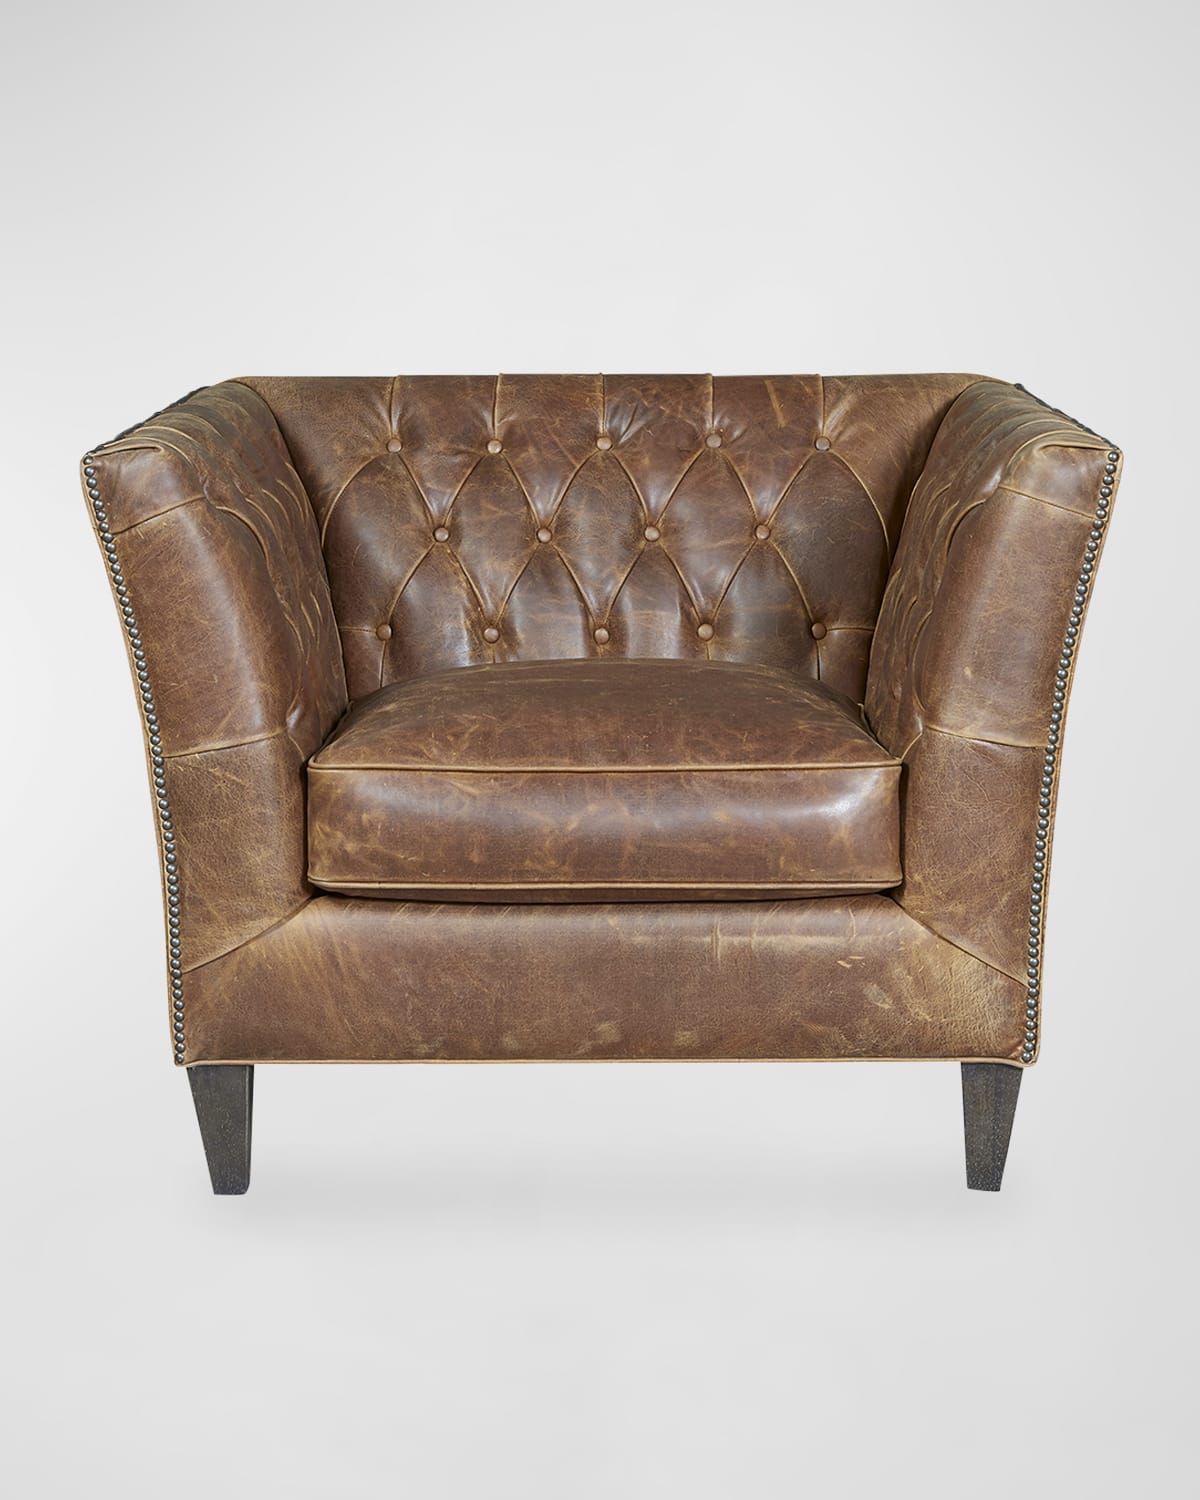 Universal Furniture Schmidt Tufted Leather Chair In Chestnut